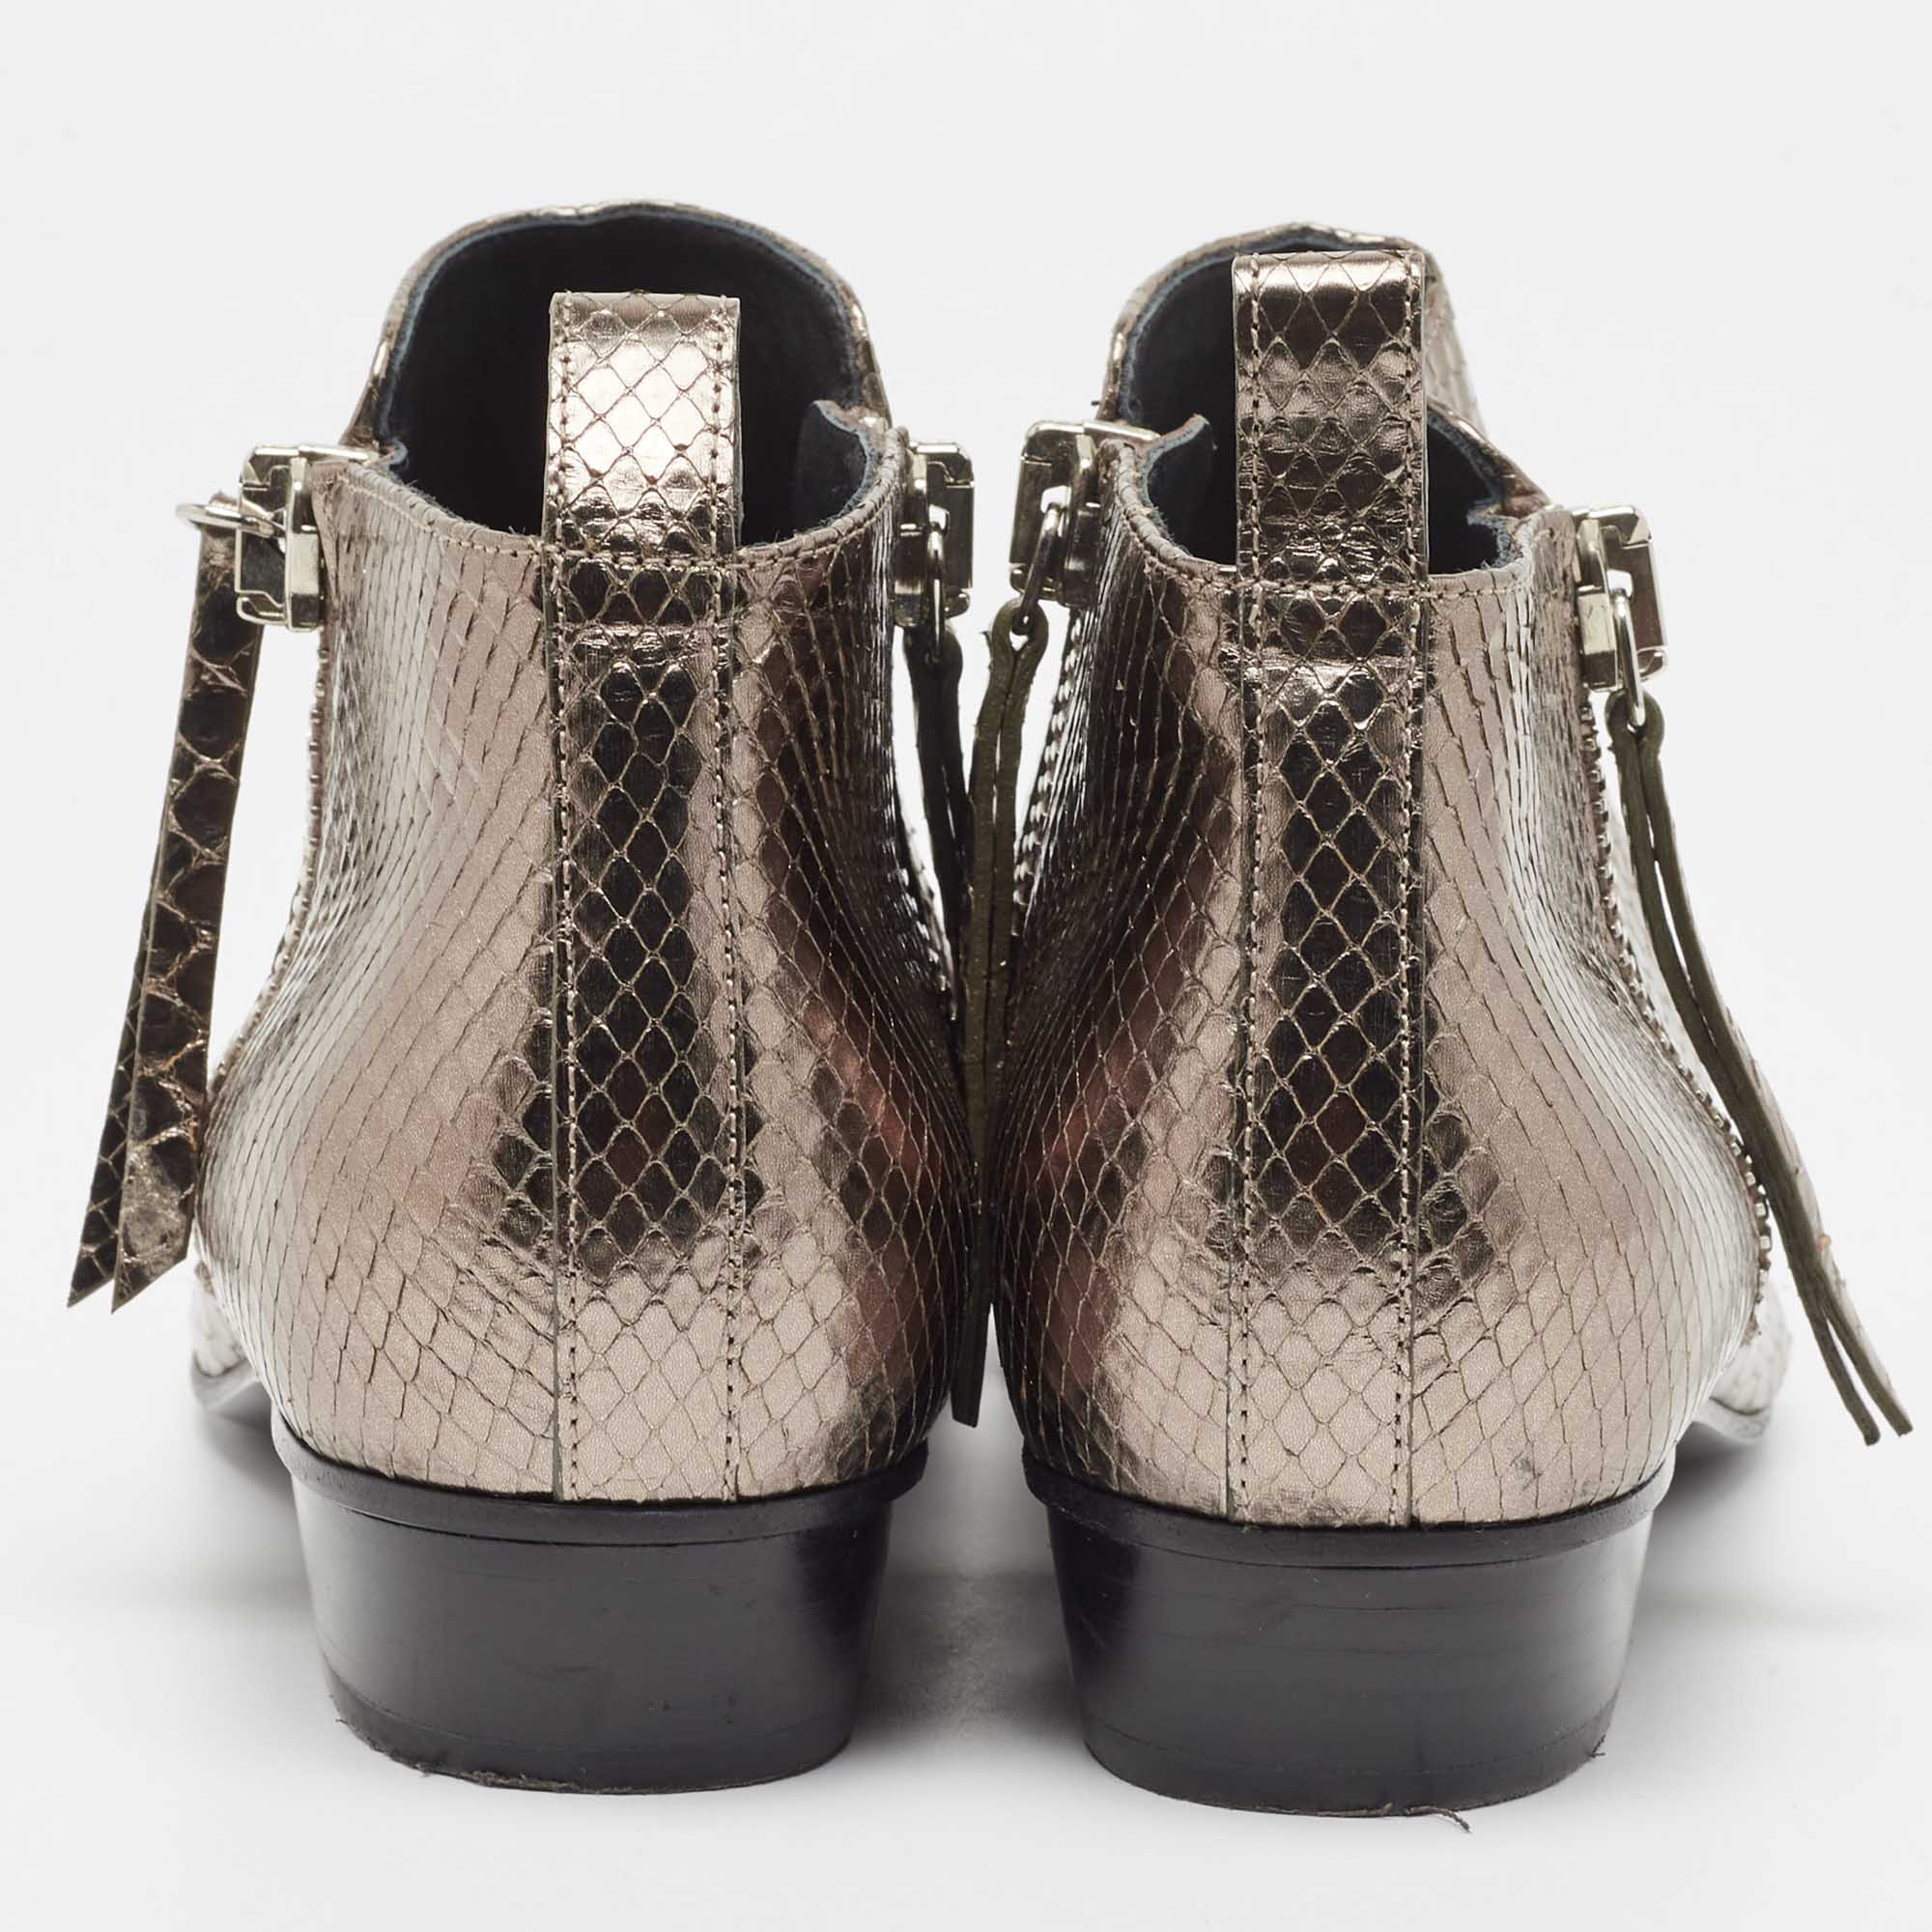 Gucci Metallic Embossed Python Ankle Boots Size 37